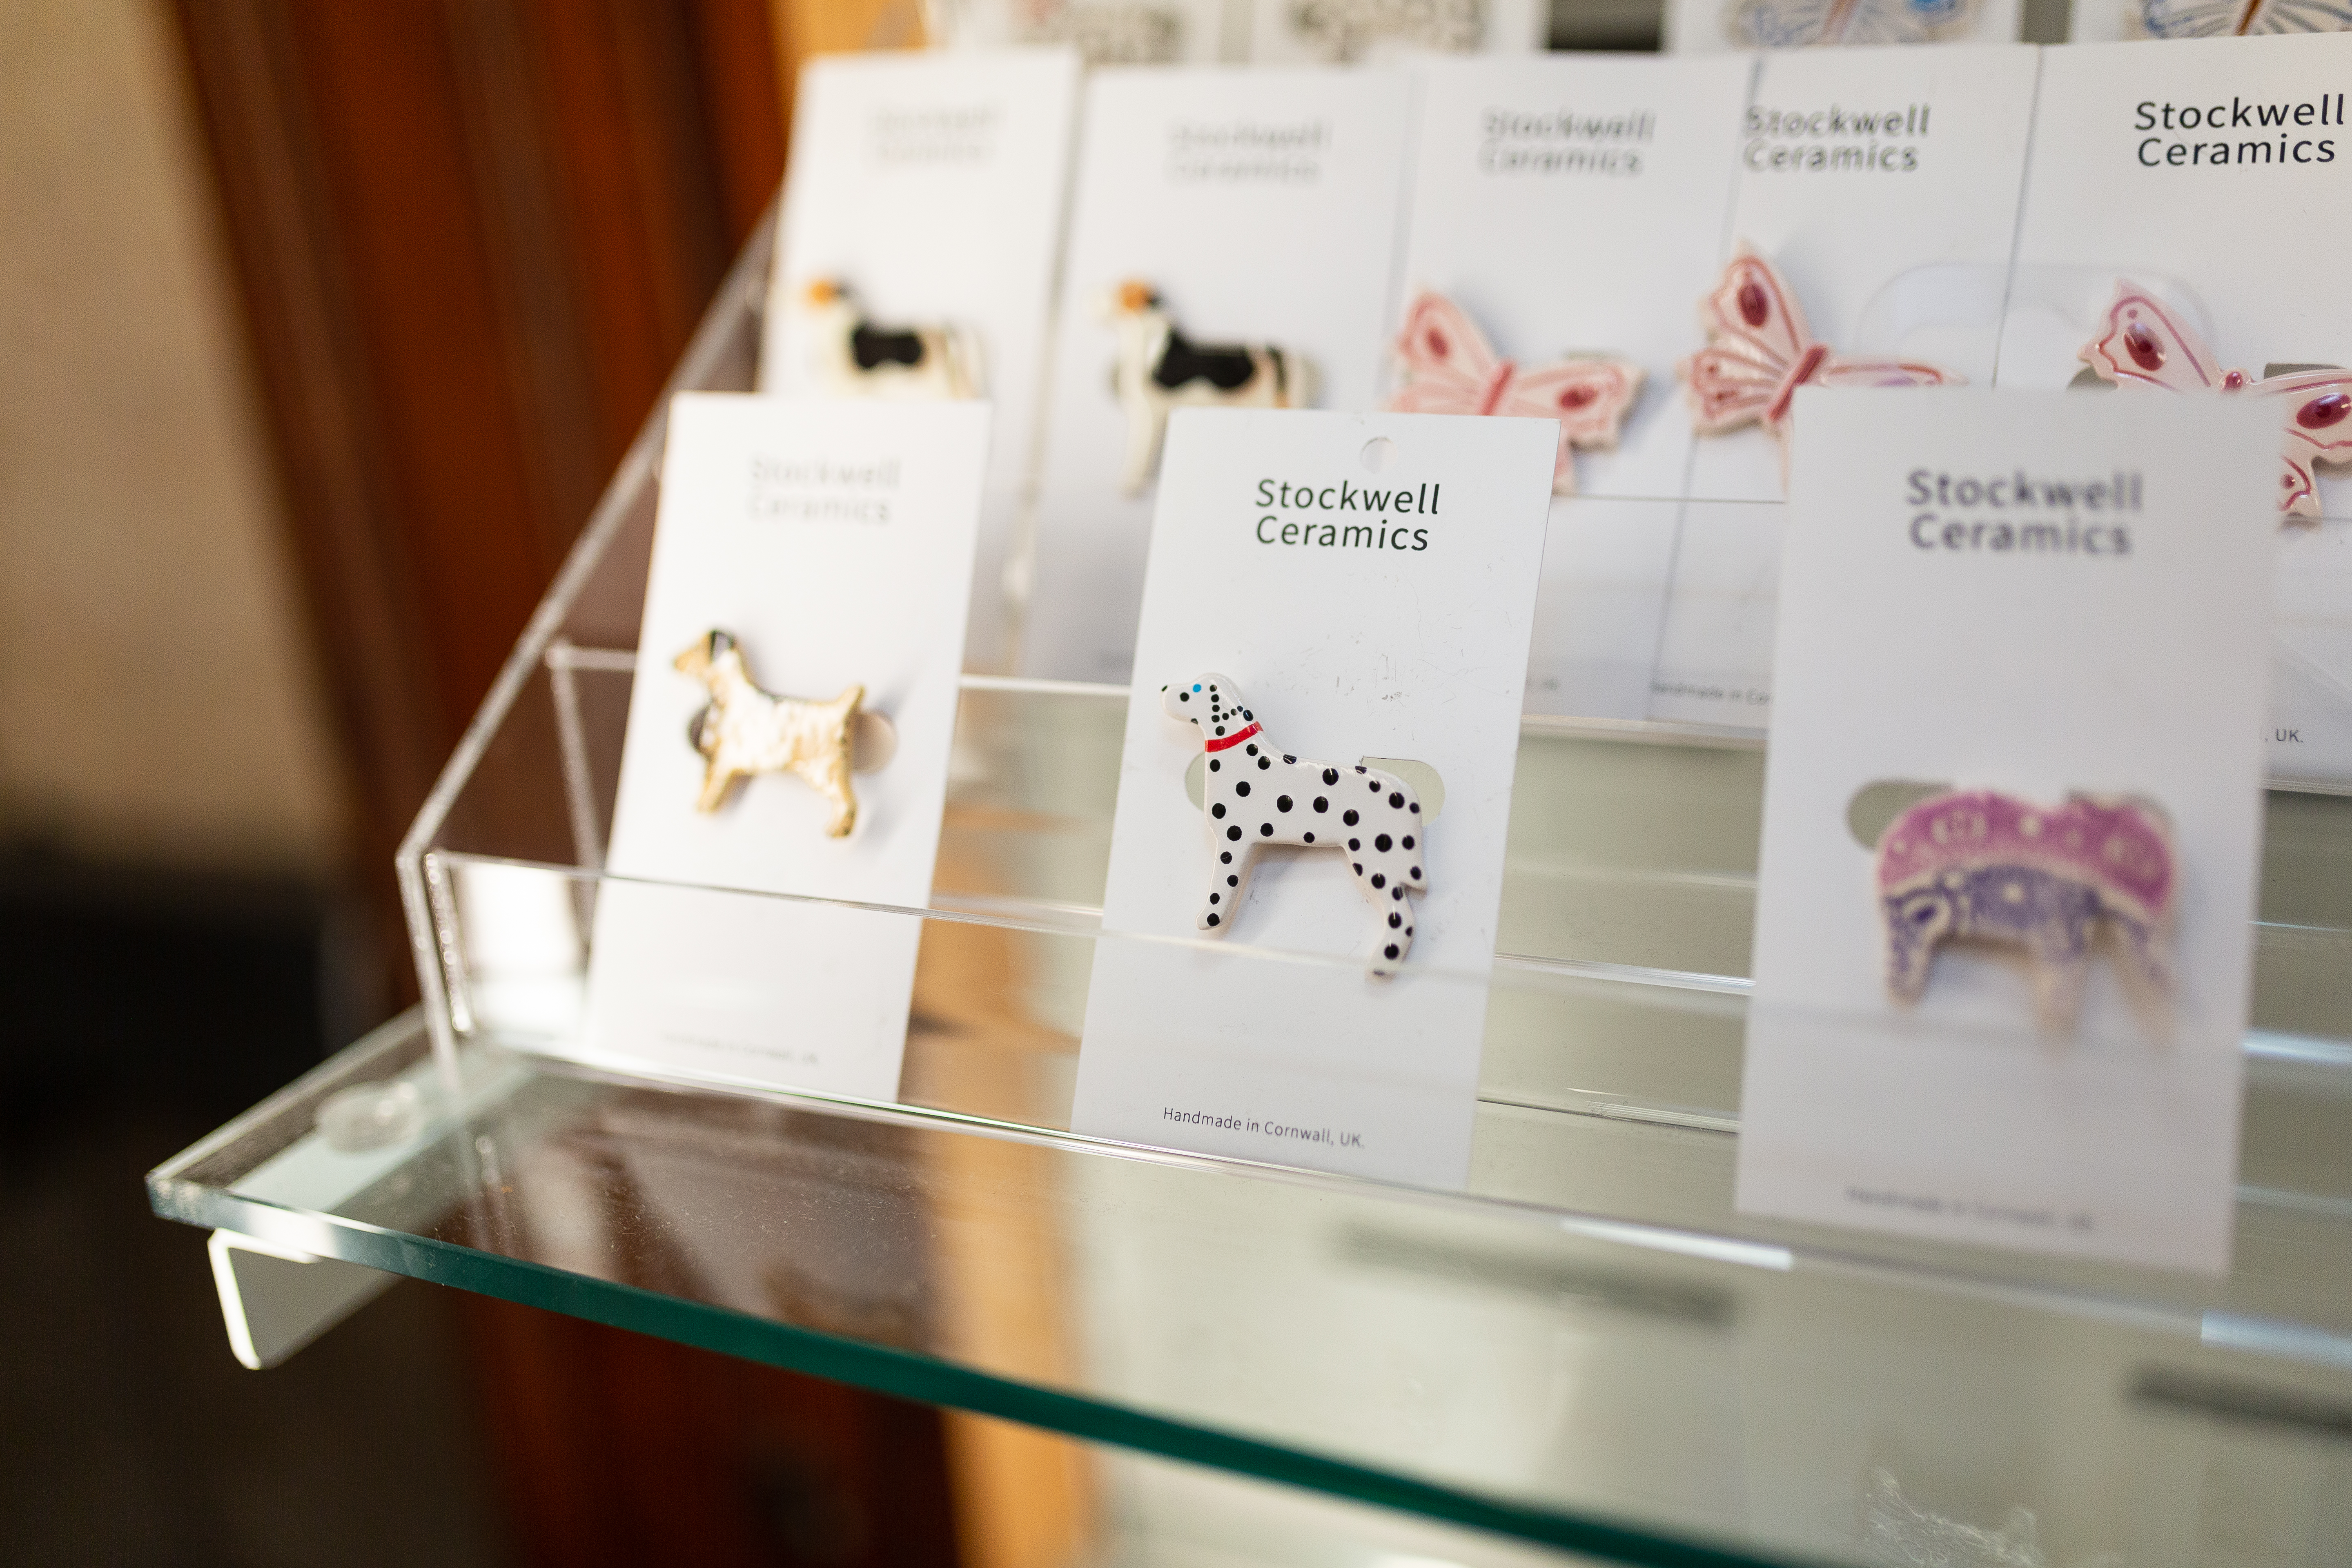 An image of ceramic broaches in the shape of dogs 